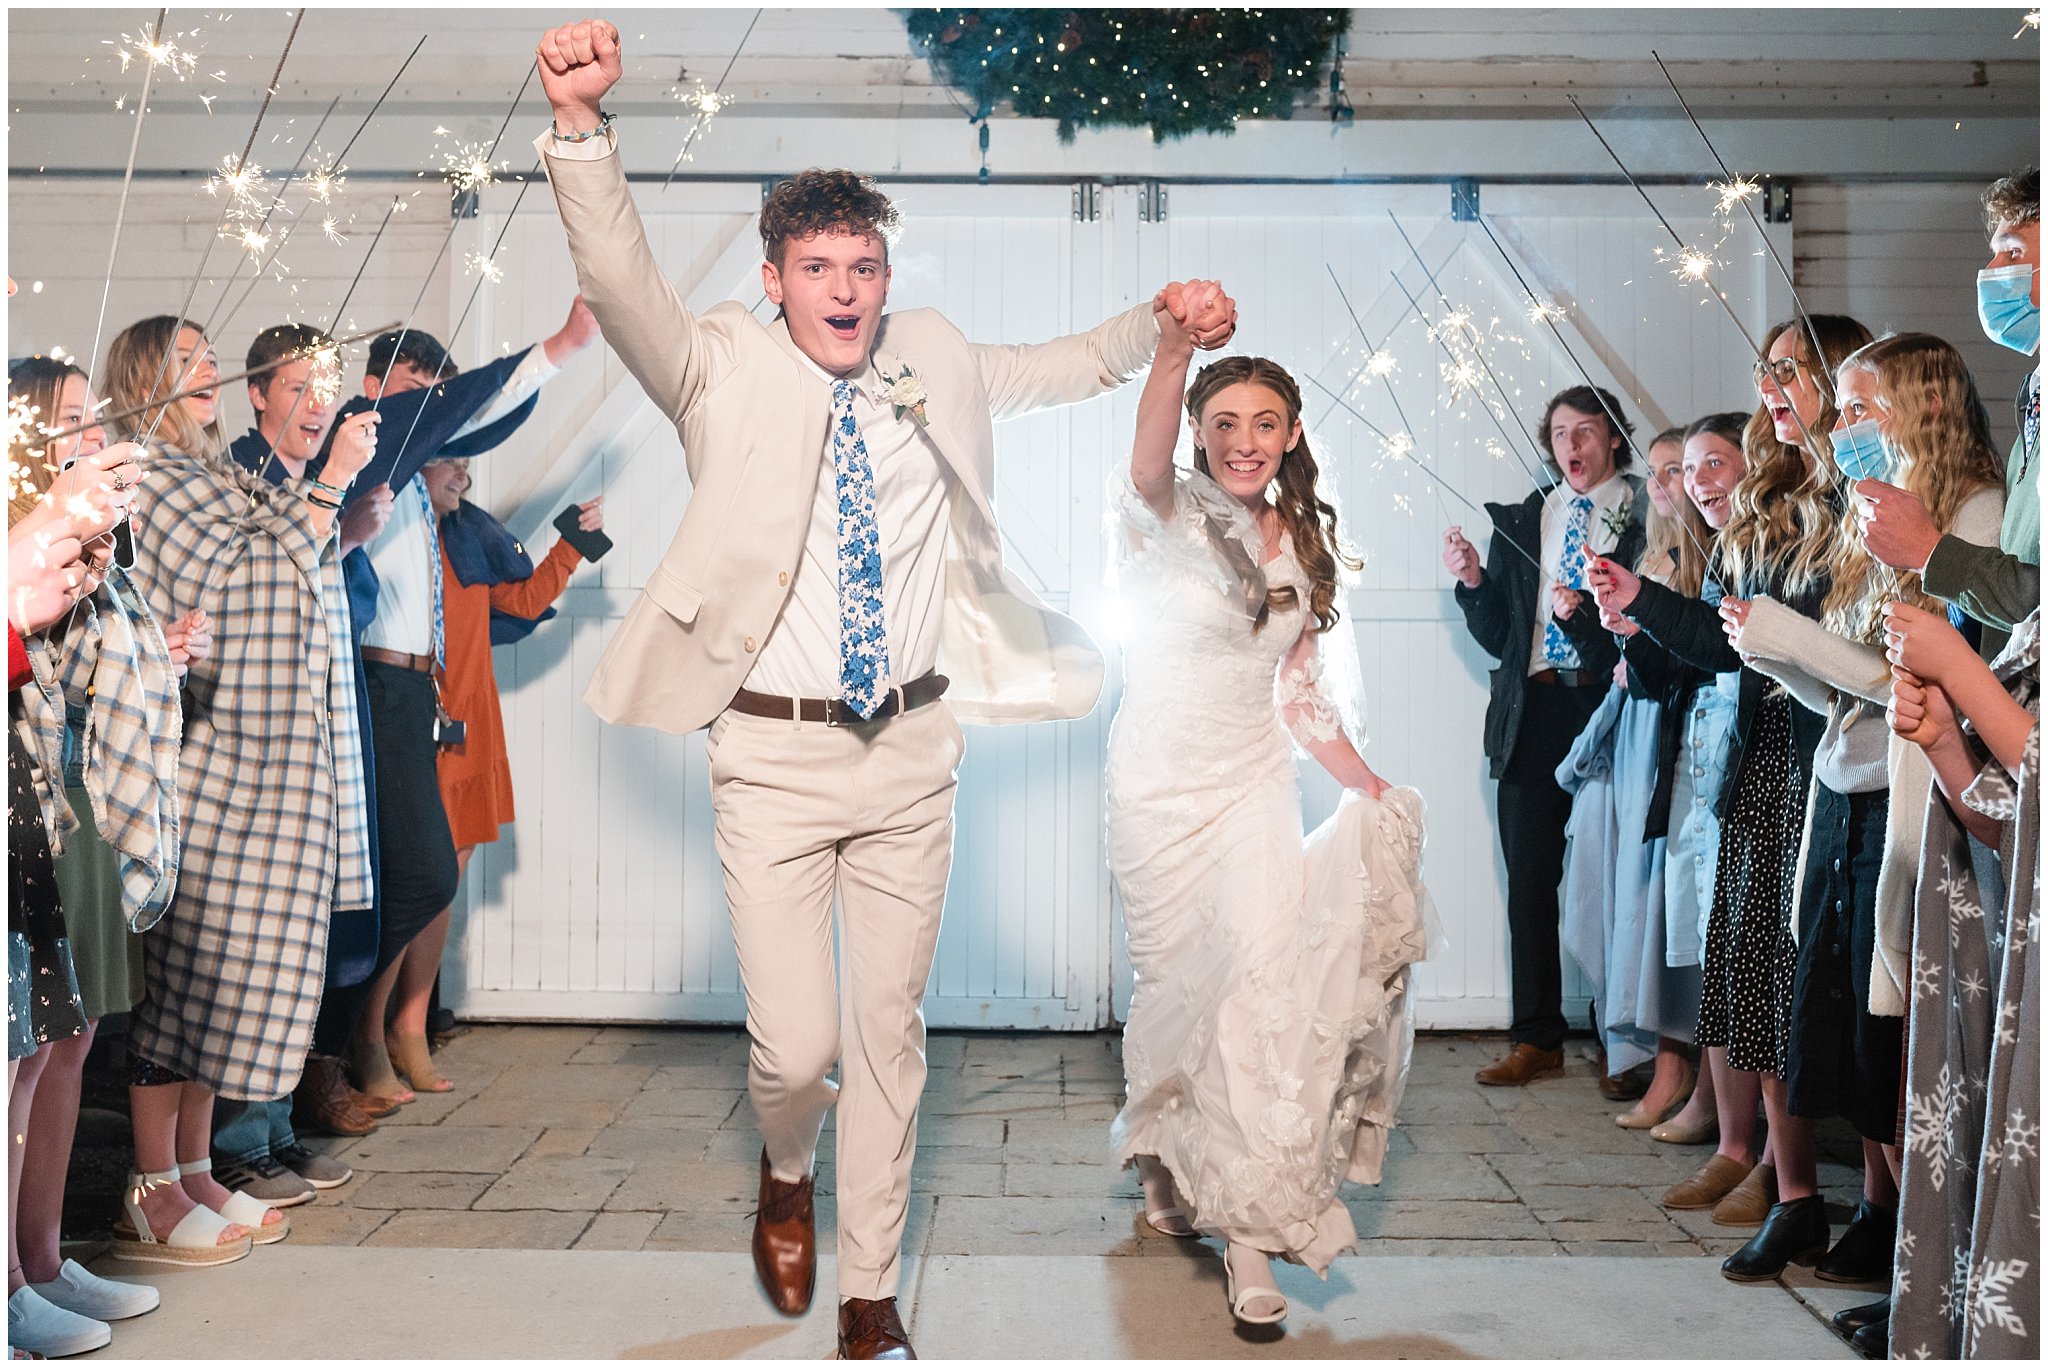 Fun and exciting sparkler exit during barn wedding | Oquirrh Mountain Temple and Draper Day Barn Winter Wedding | Jessie and Dallin Photography